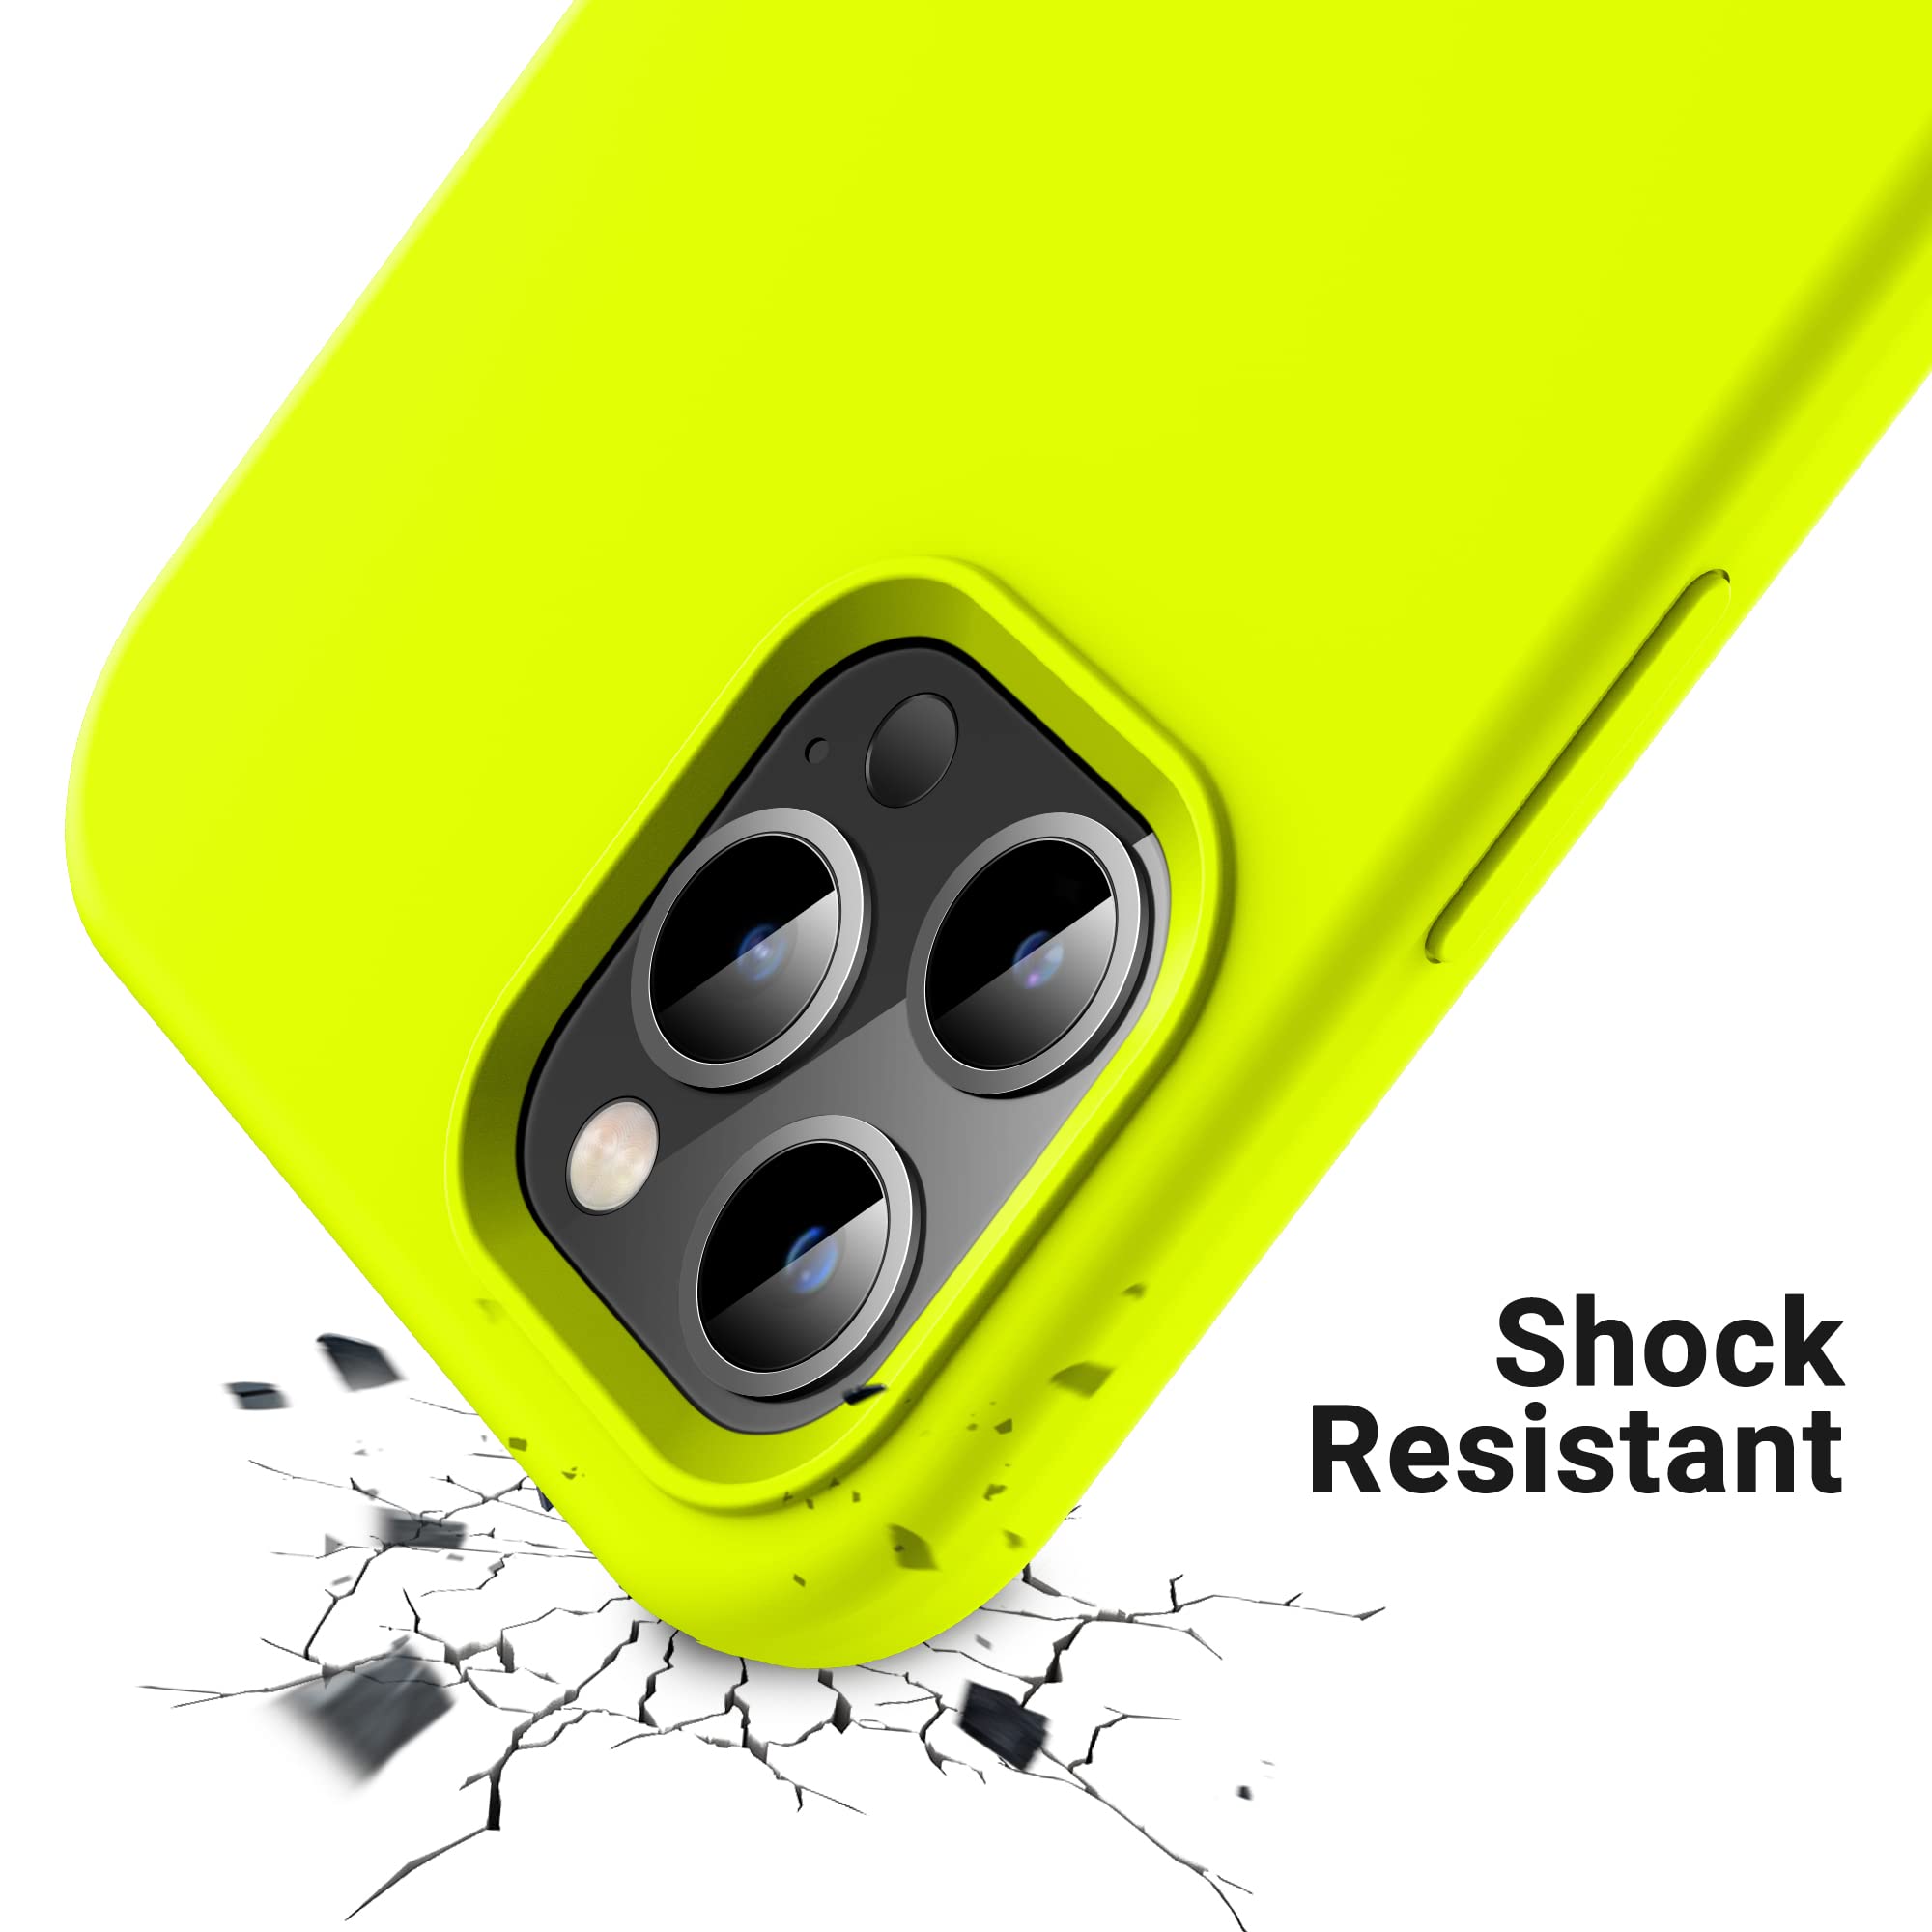 OTOFLY Compatible with iPhone 12 Pro Max Case 6.7 inch(2020),[Silky and Soft Touch Series]Premium Soft Liquid Silicone Rubber Full-Body Protective Bumper Case for iPhone 12 Pro Max(Fluorescent Yellow)